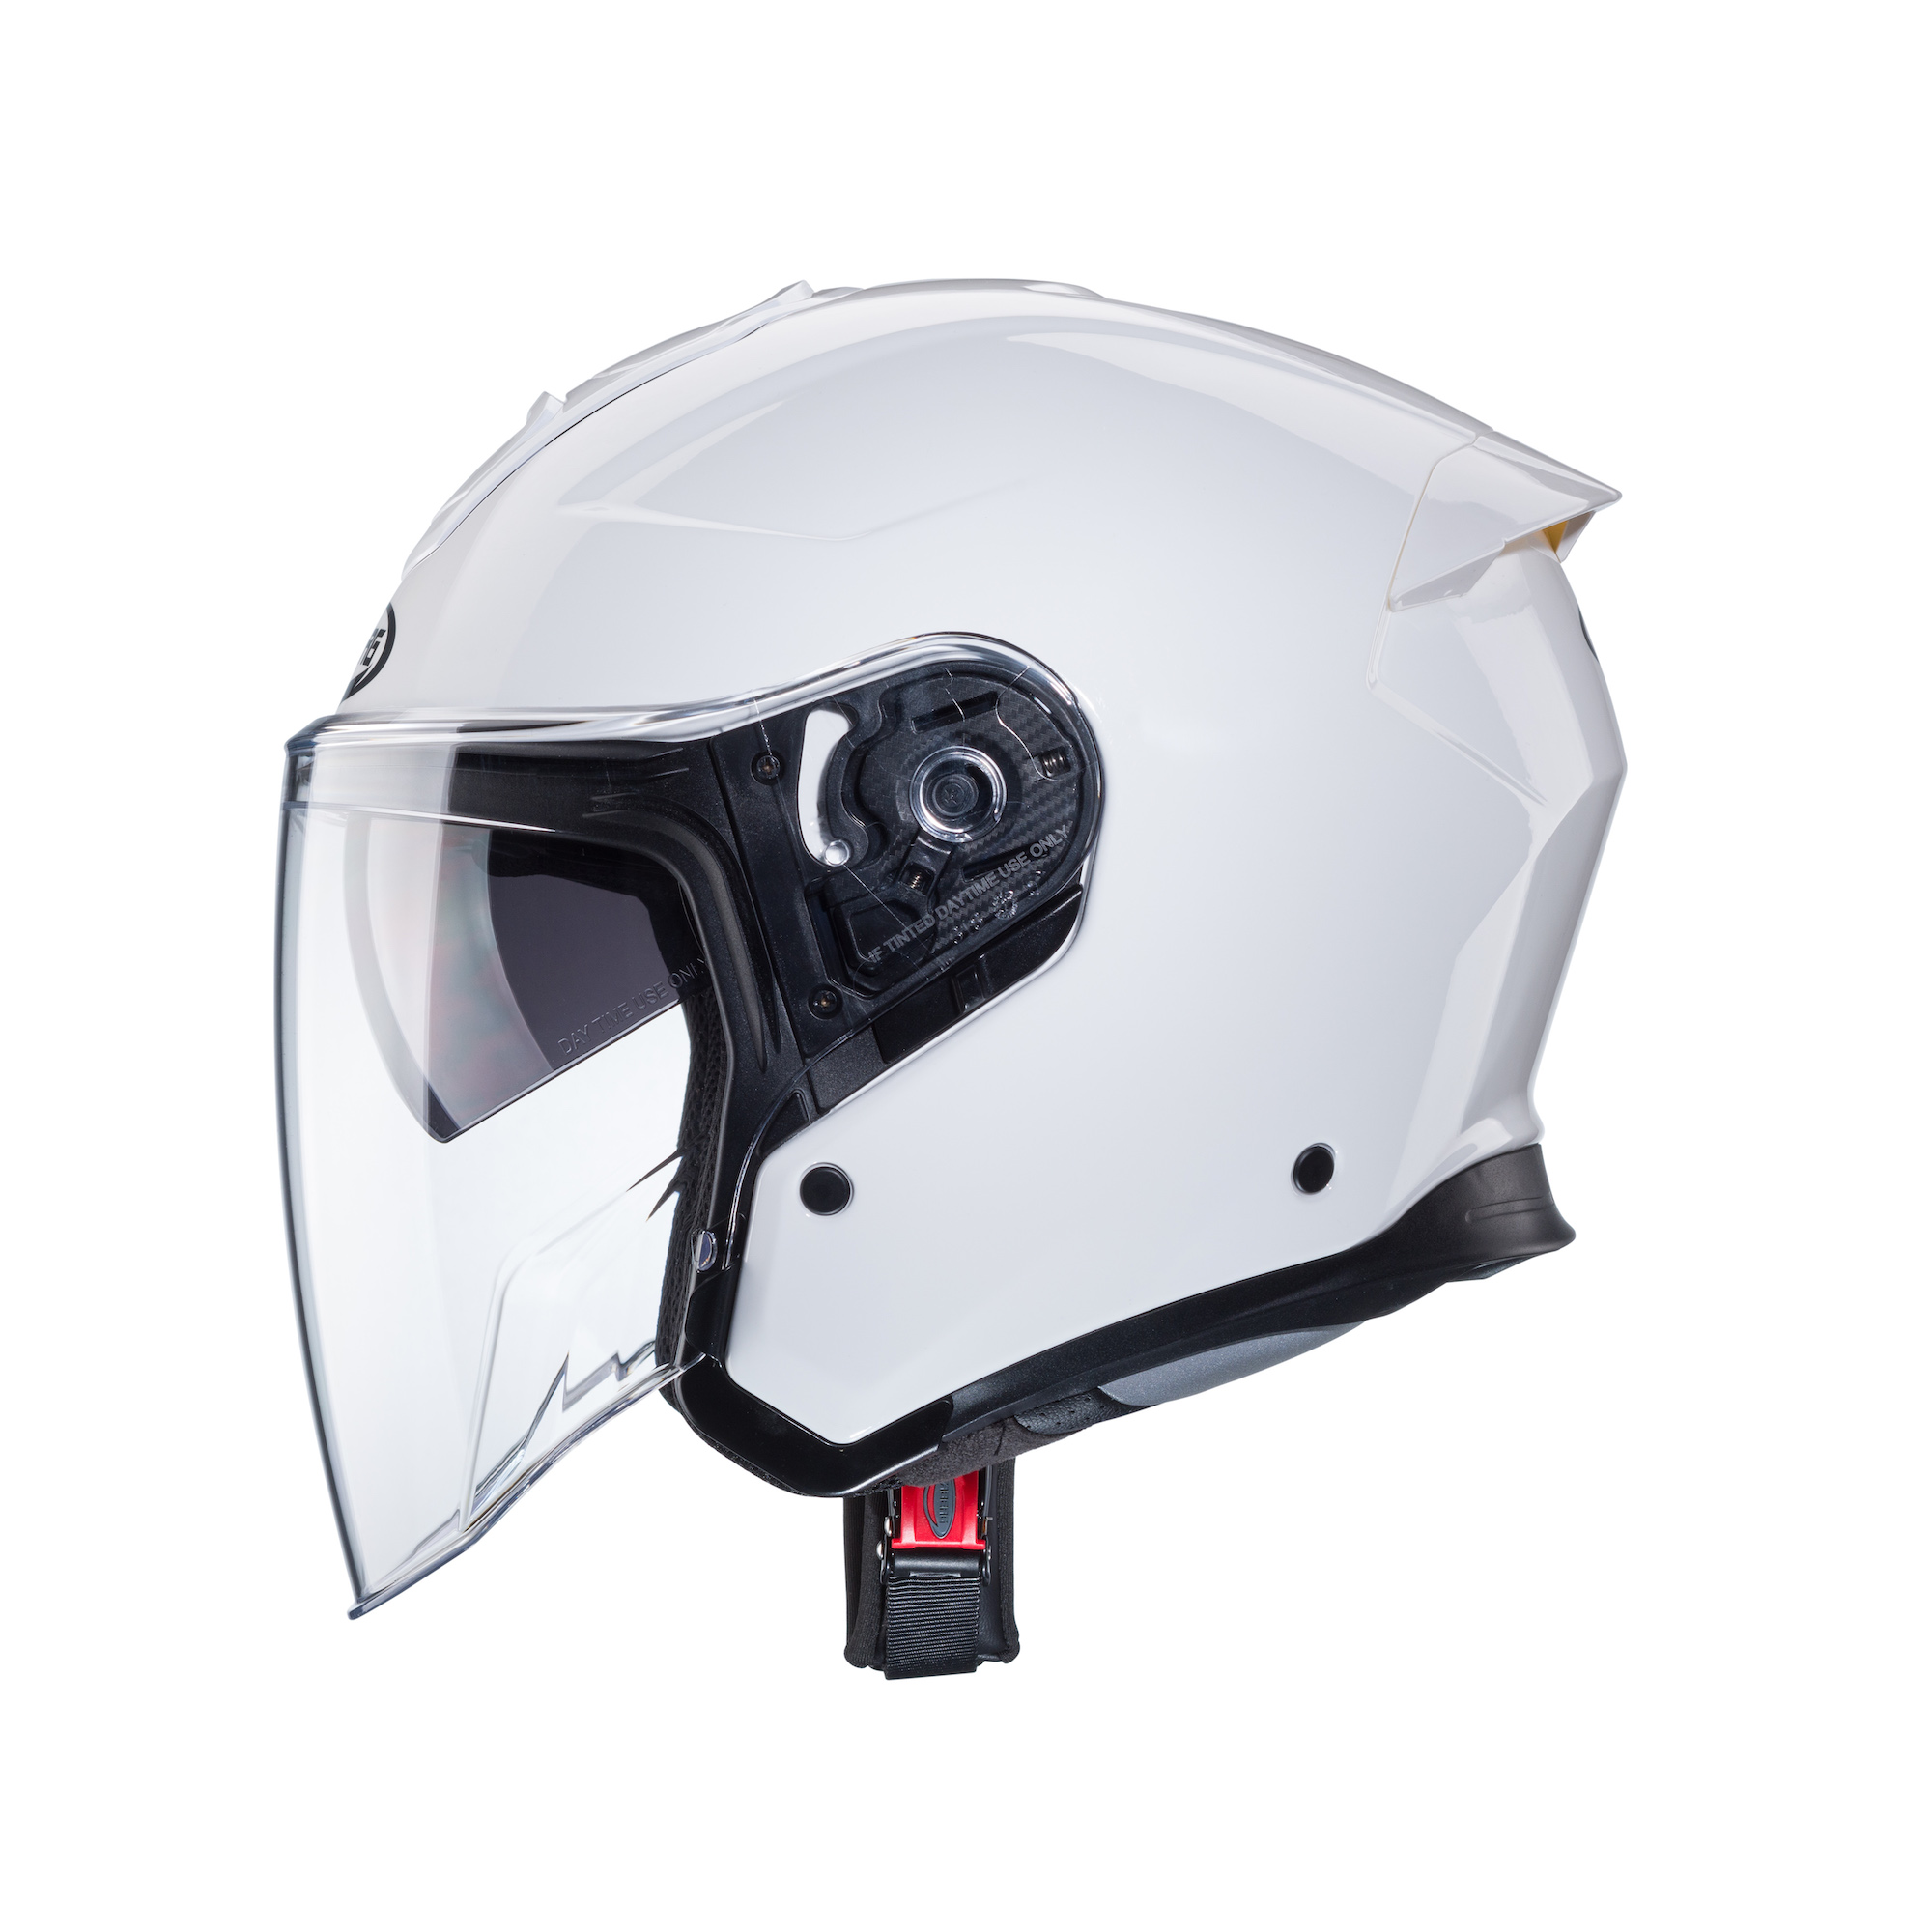 Caberg's newest Jet helmet, the FLYON II. Media sourced from Caberg's press release.